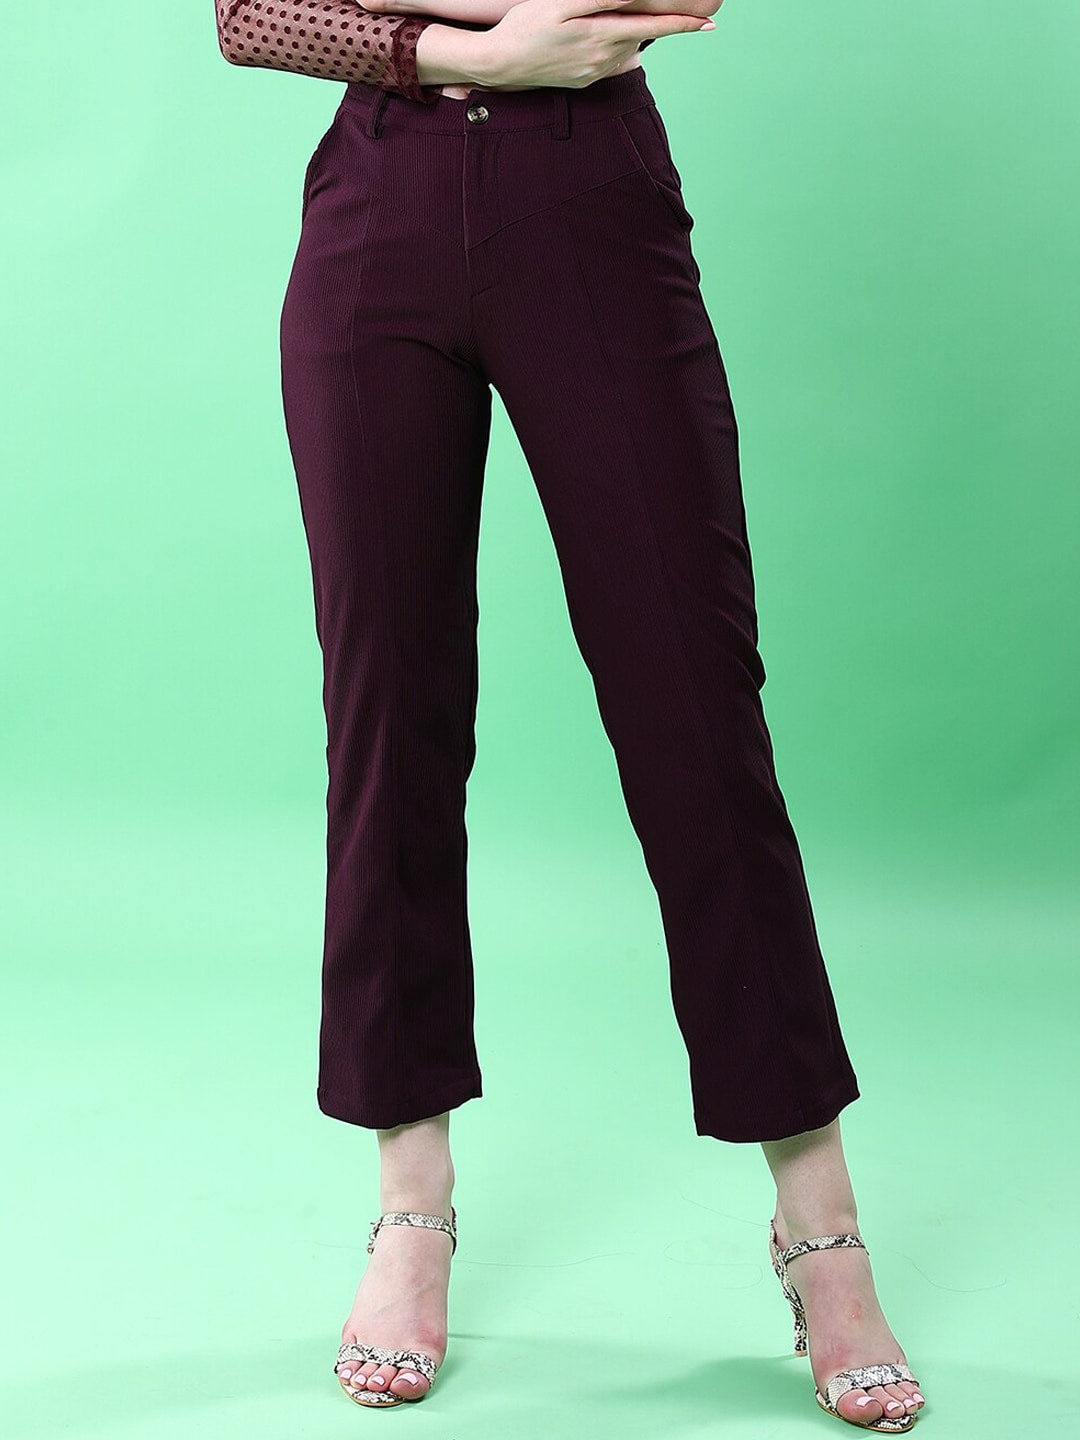 Shop Women Cut And Sew Tapered Corduroy Pant Online.